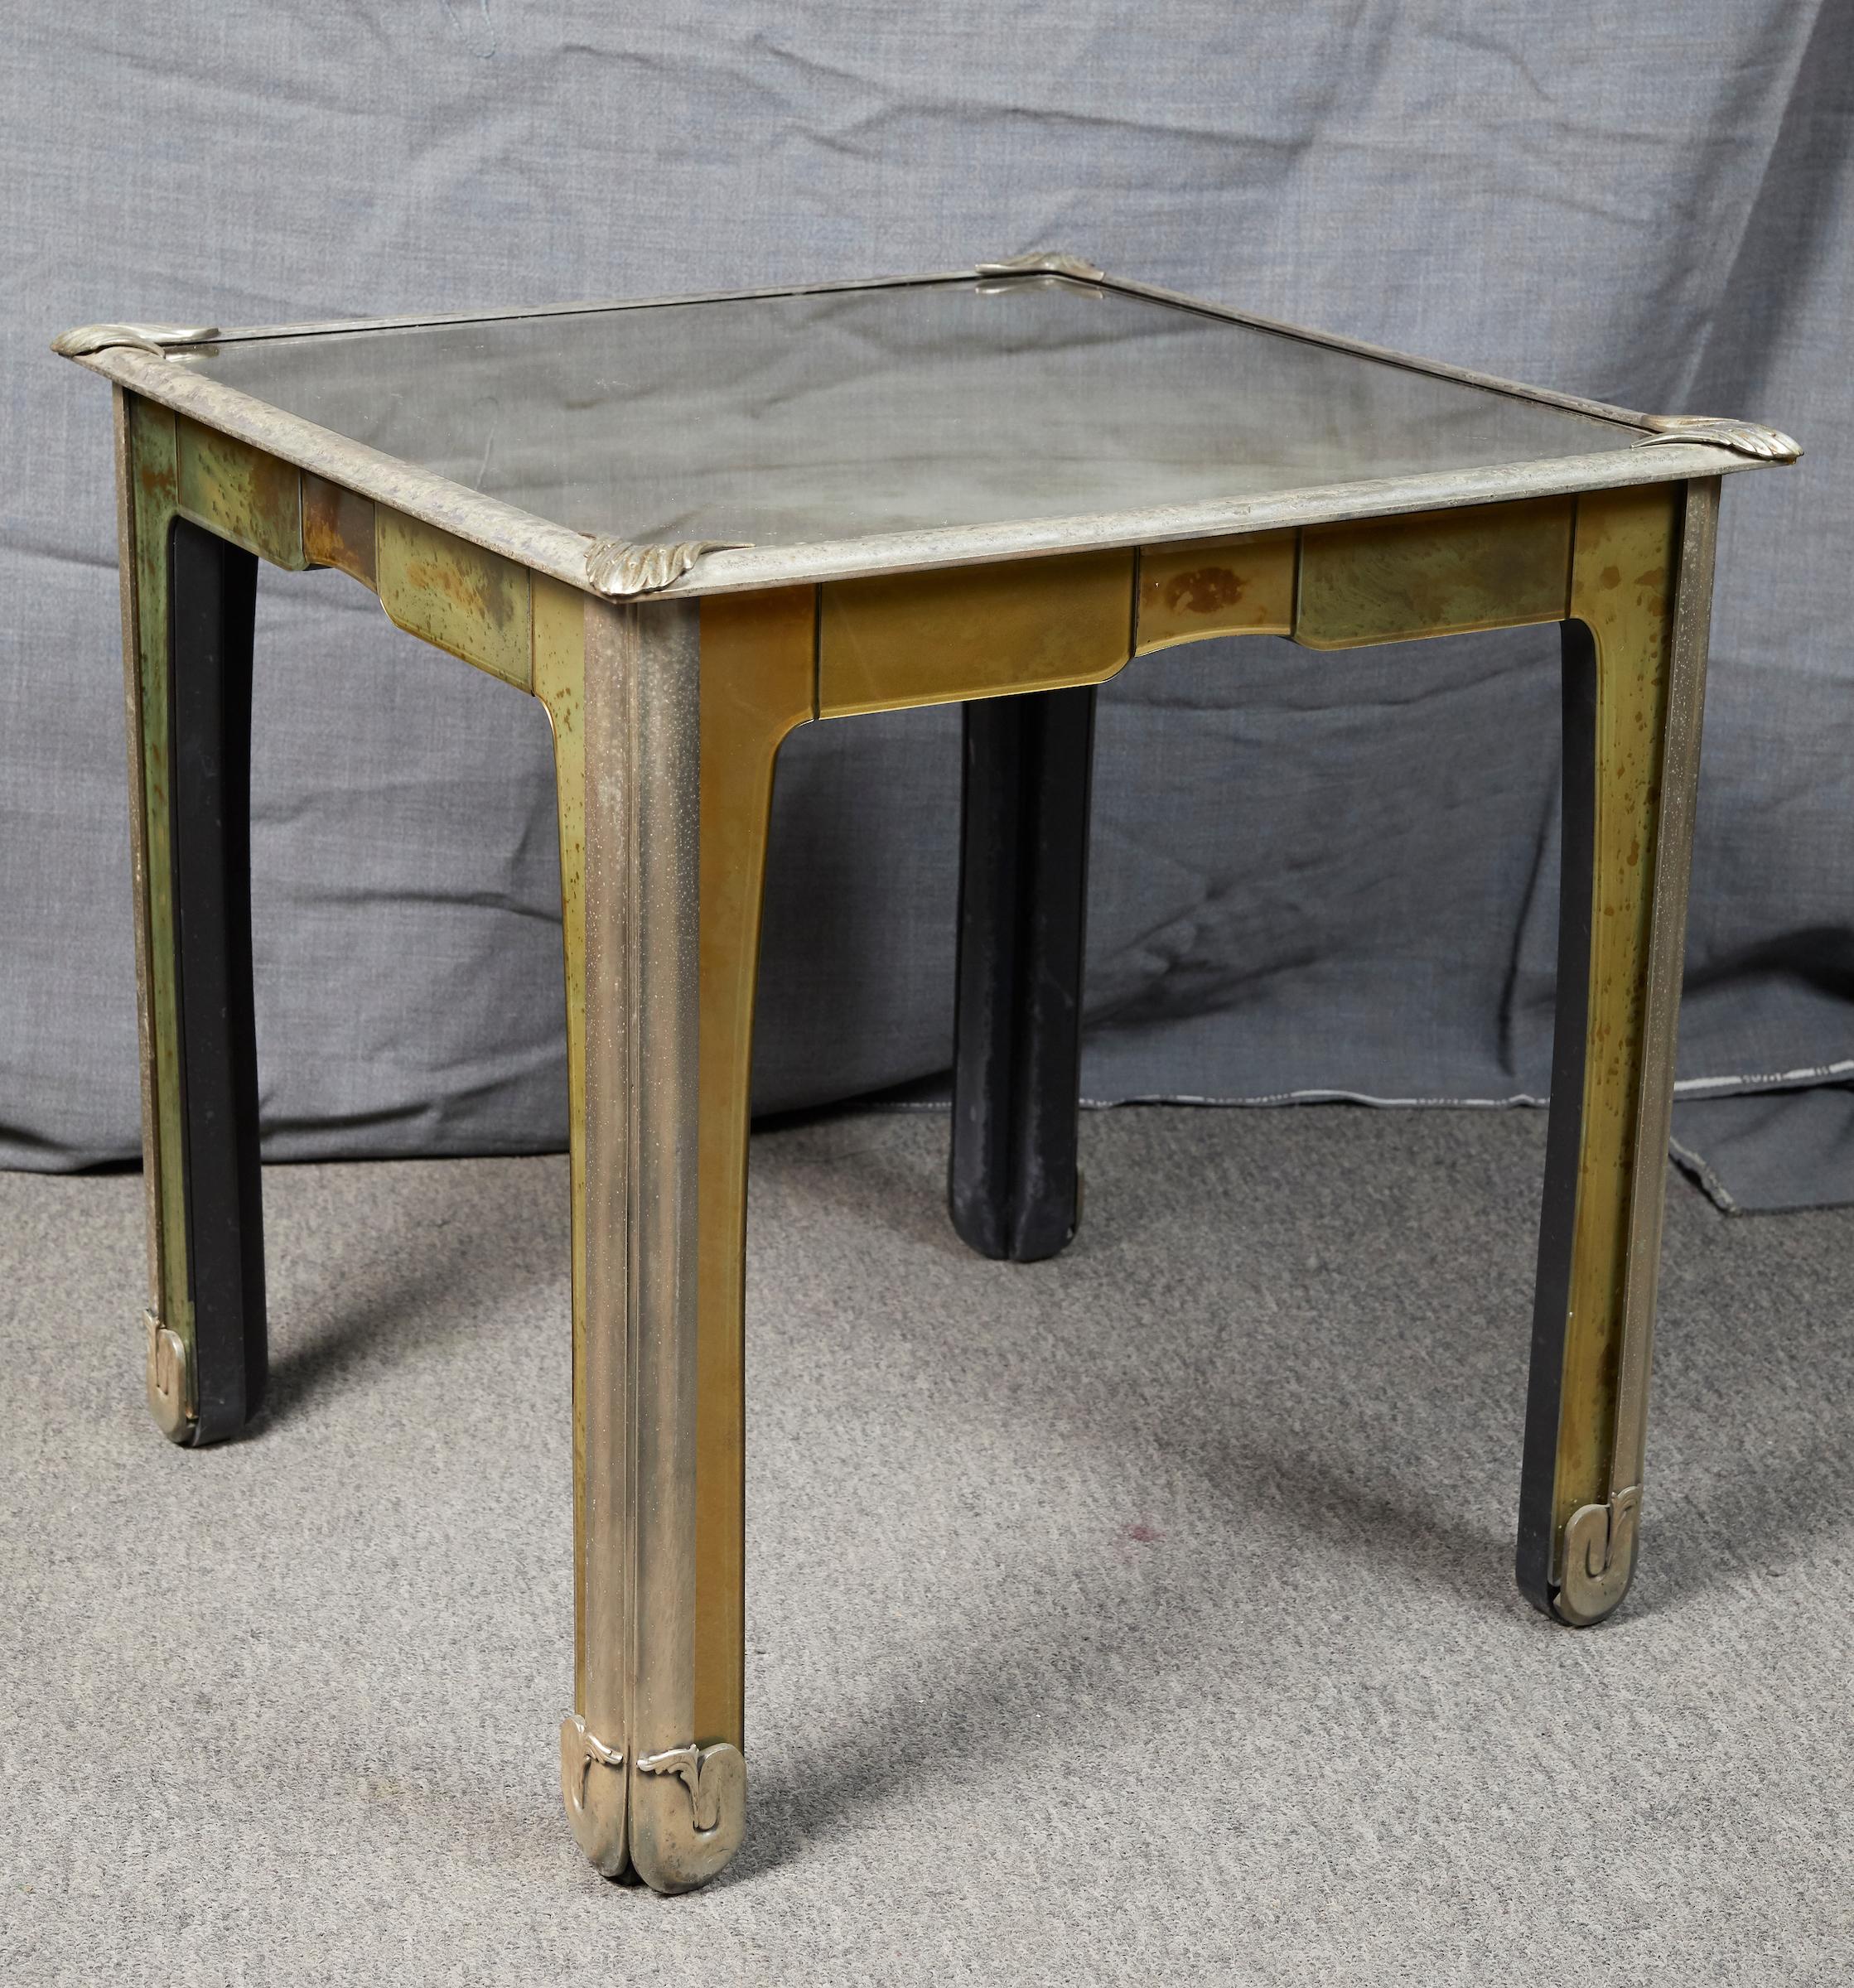 Italian Art Nouveau Style Mirrored Side Table In Good Condition For Sale In Montreal, QC